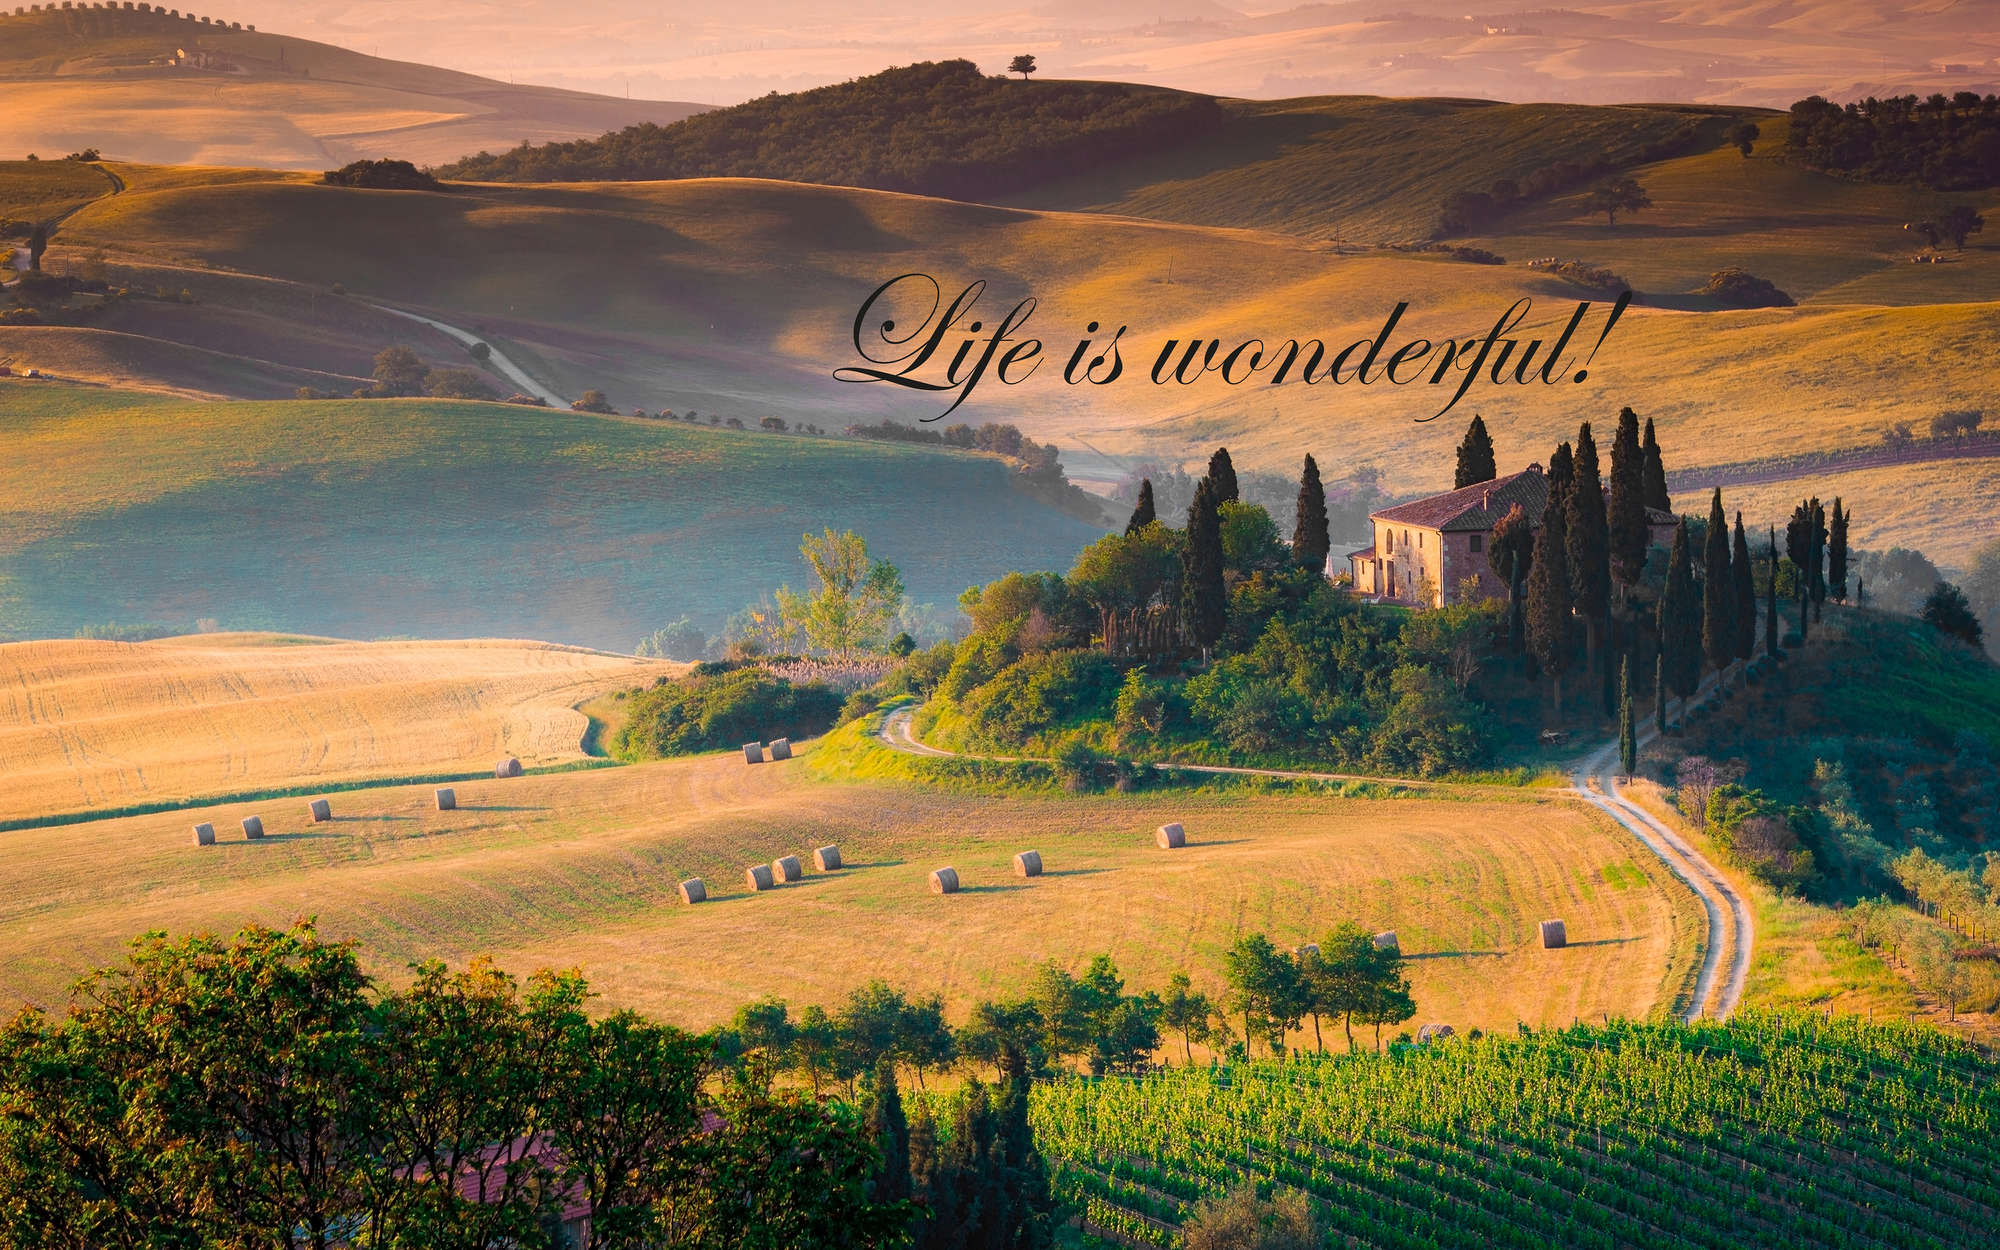             Photo wallpaper Tuscany with writing "Life is wonderful!" - Mother of pearl smooth fleece
        